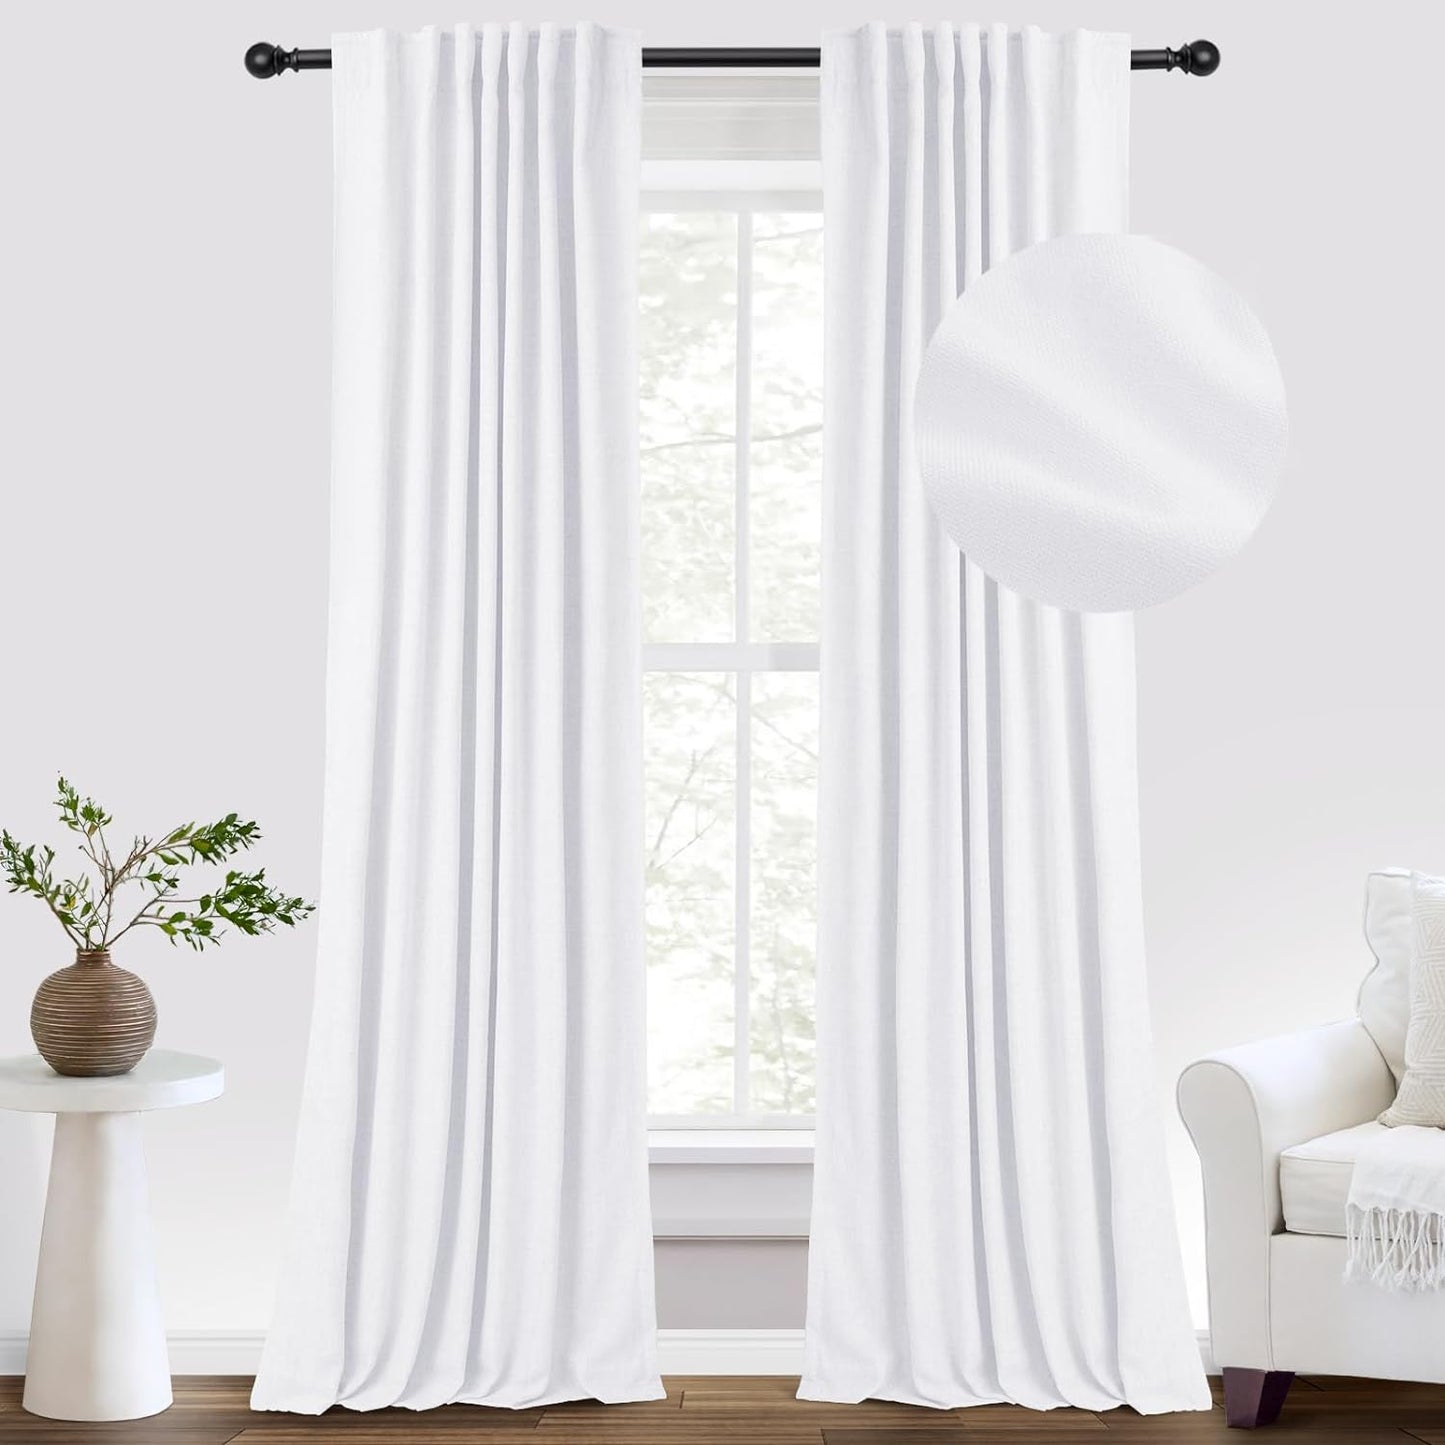 INOVADAY 100% Blackout Curtains 96 Inches Long 2 Panels Set, Thermal Insulated Linen Blackout Curtains for Bedroom, Back Tab/Rod Pocket Curtains & Drapes for Living Room - Beige, W50 X L96  INOVADAY 03 Bright White 50''W X 90''L 